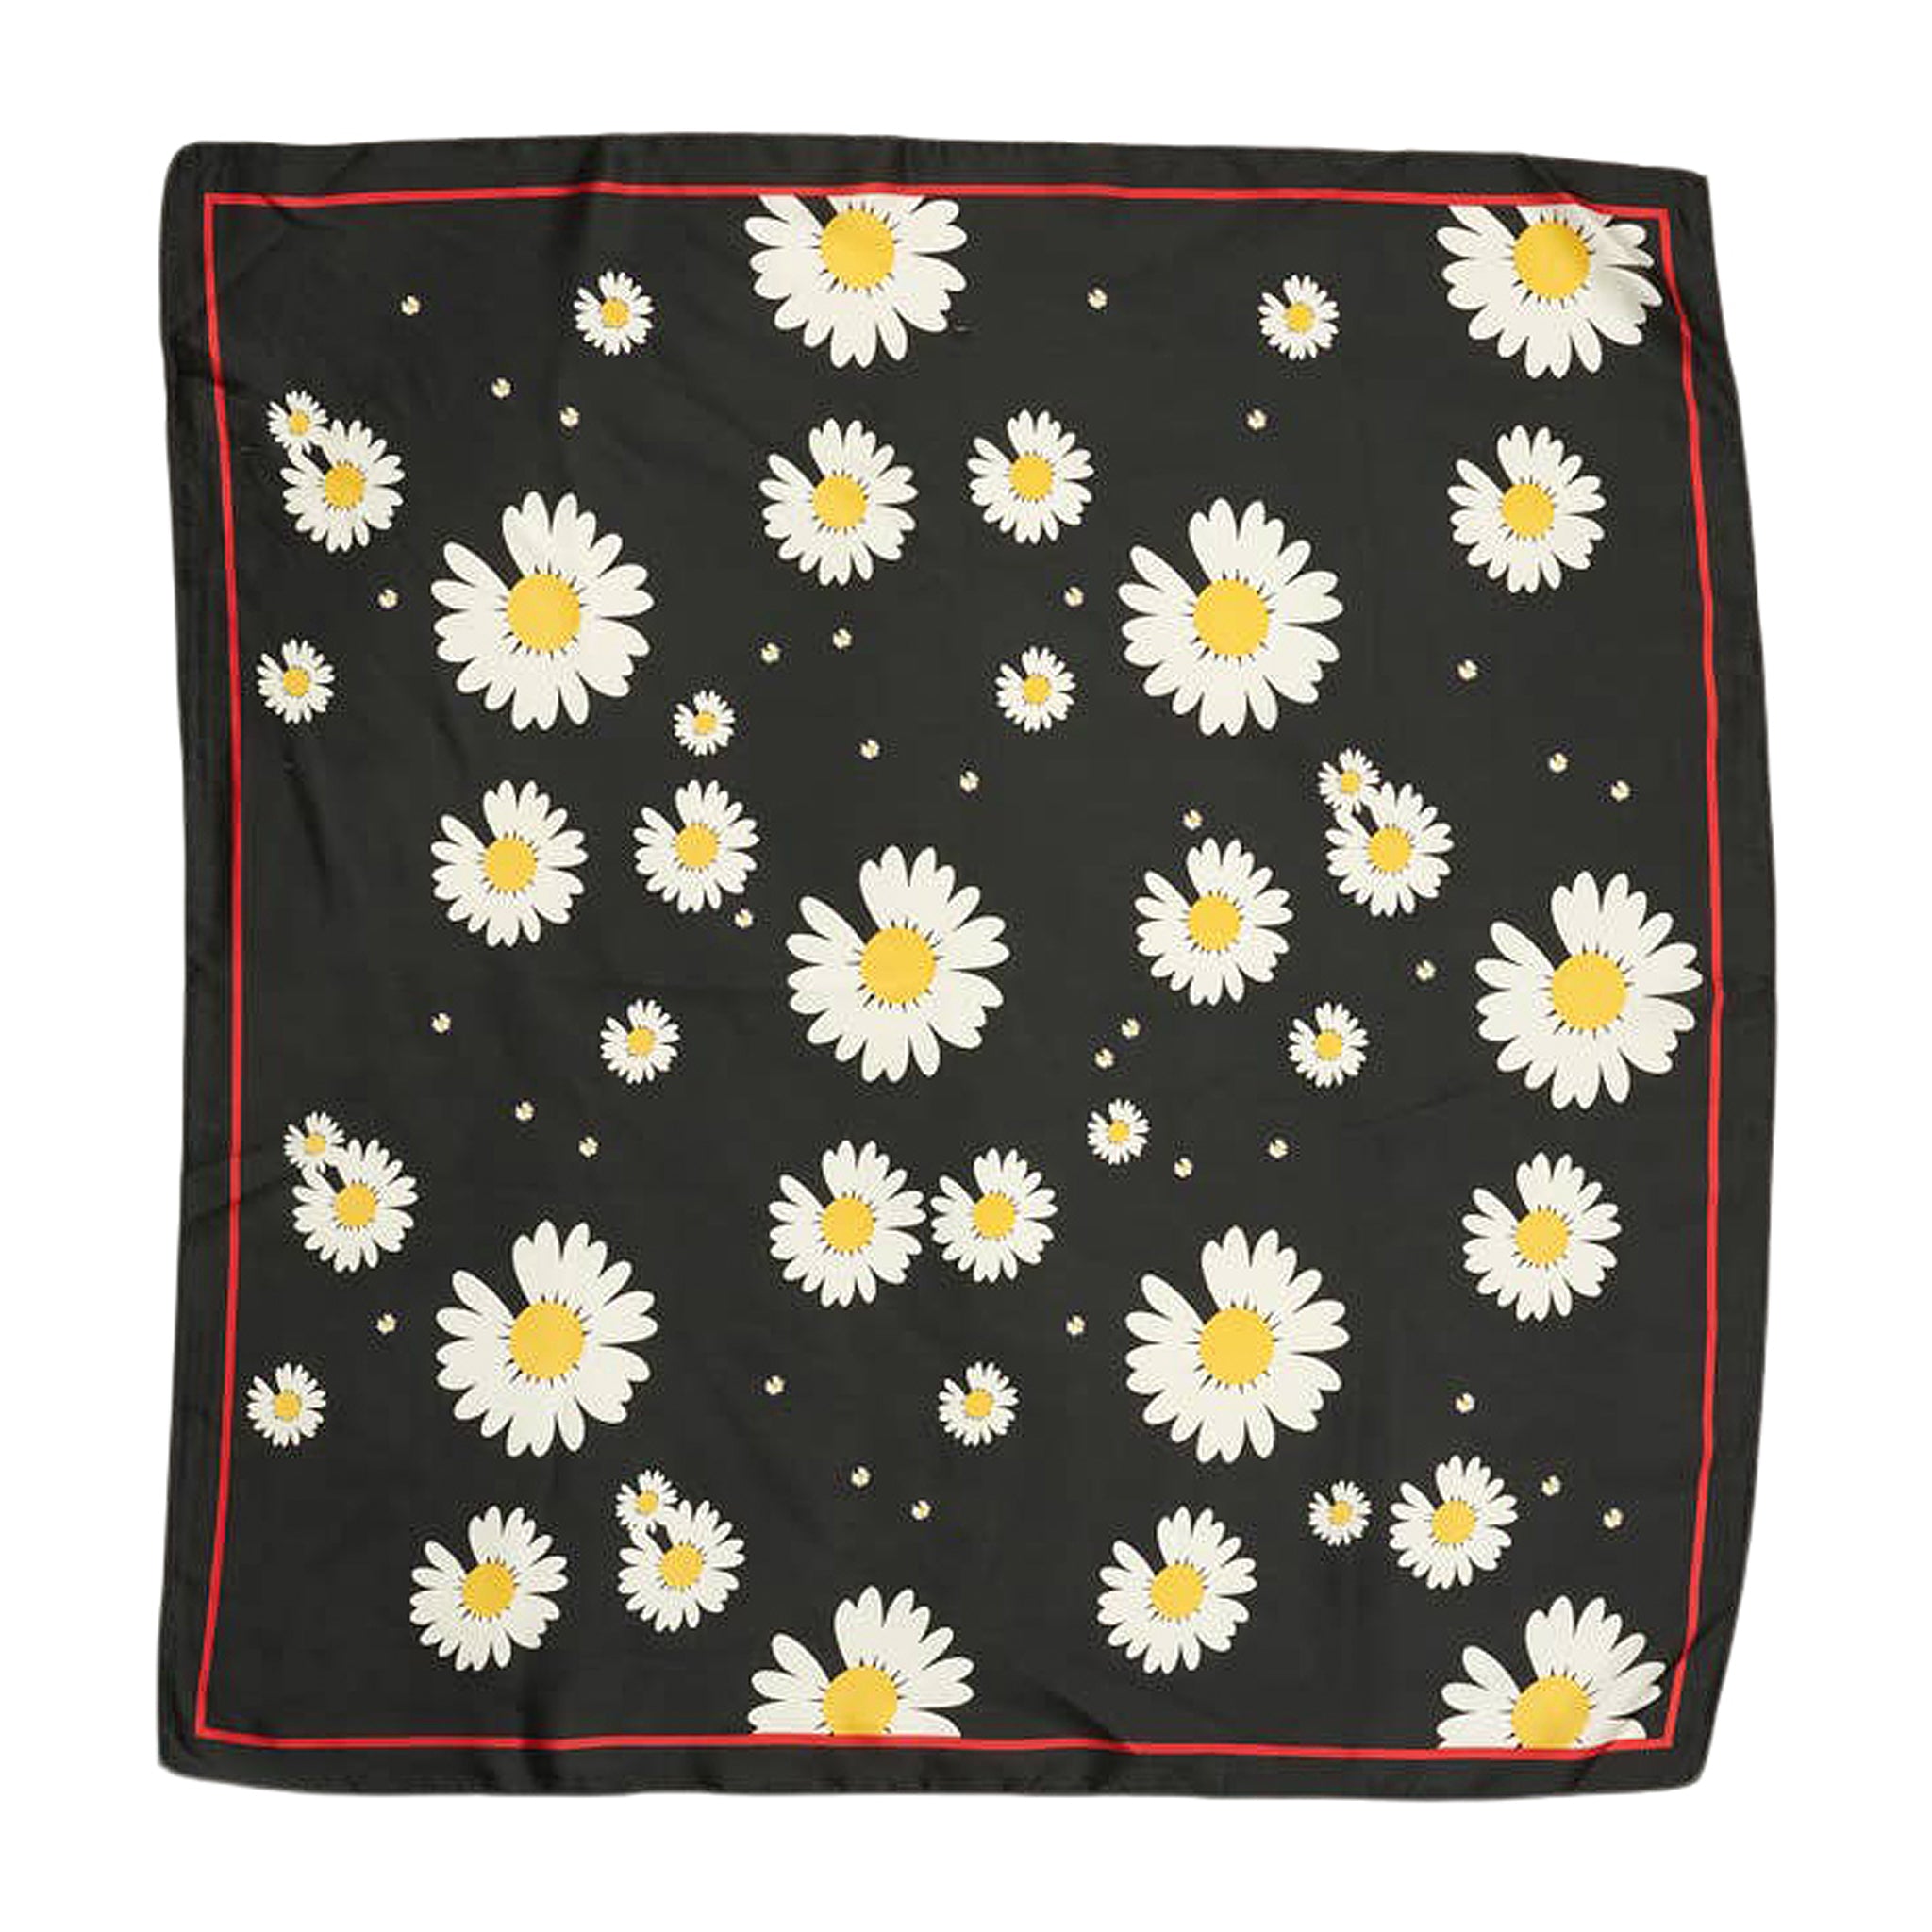 Avenue Zoe Chamomile Print Silky Bandana Scarf in Black, White and Yellow Floral